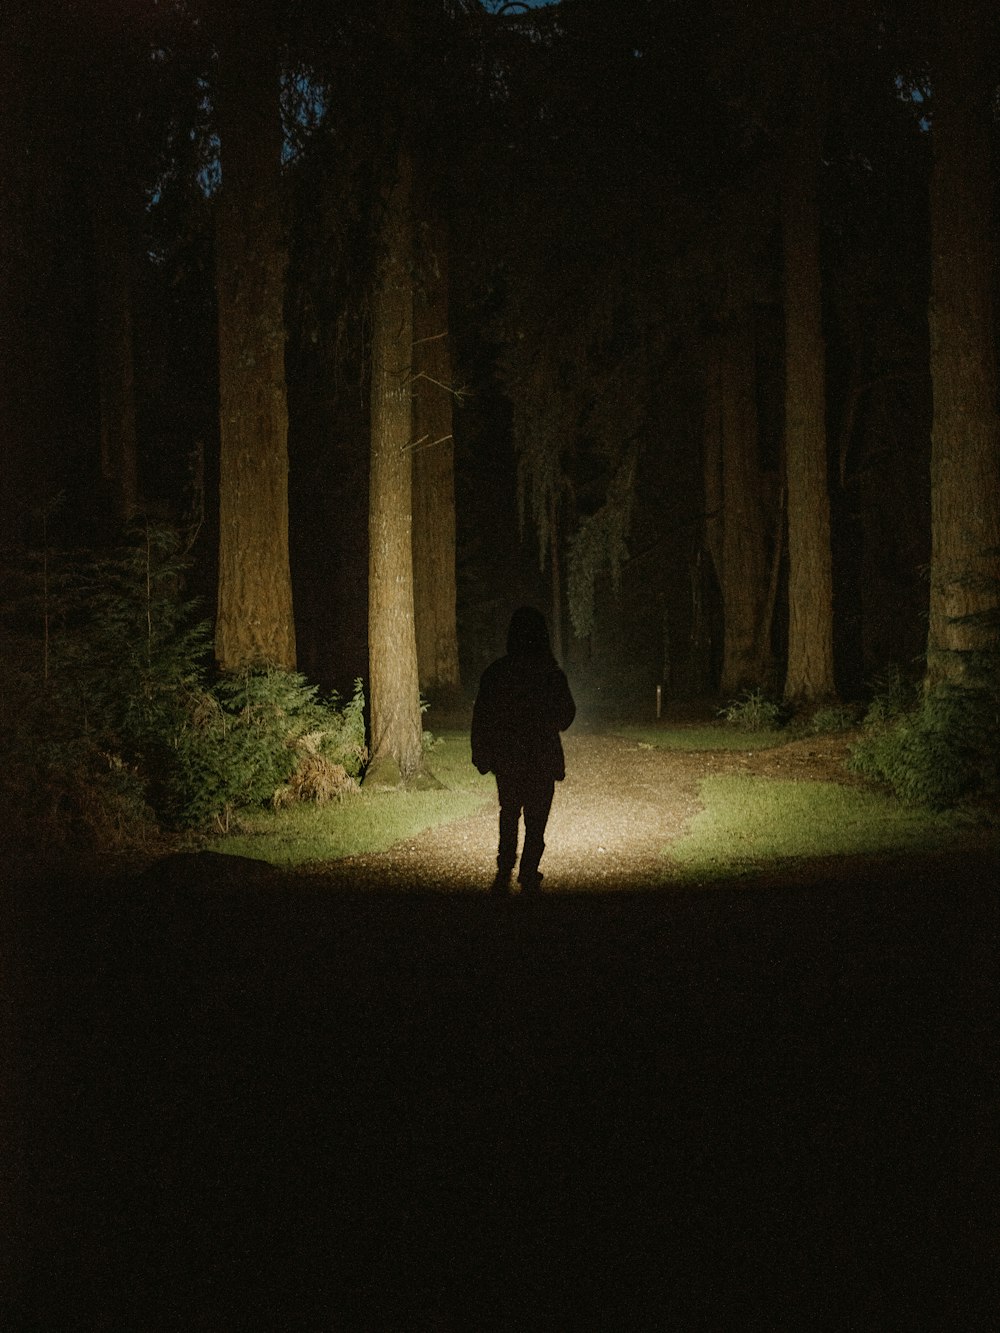 a person standing in the middle of a forest at night